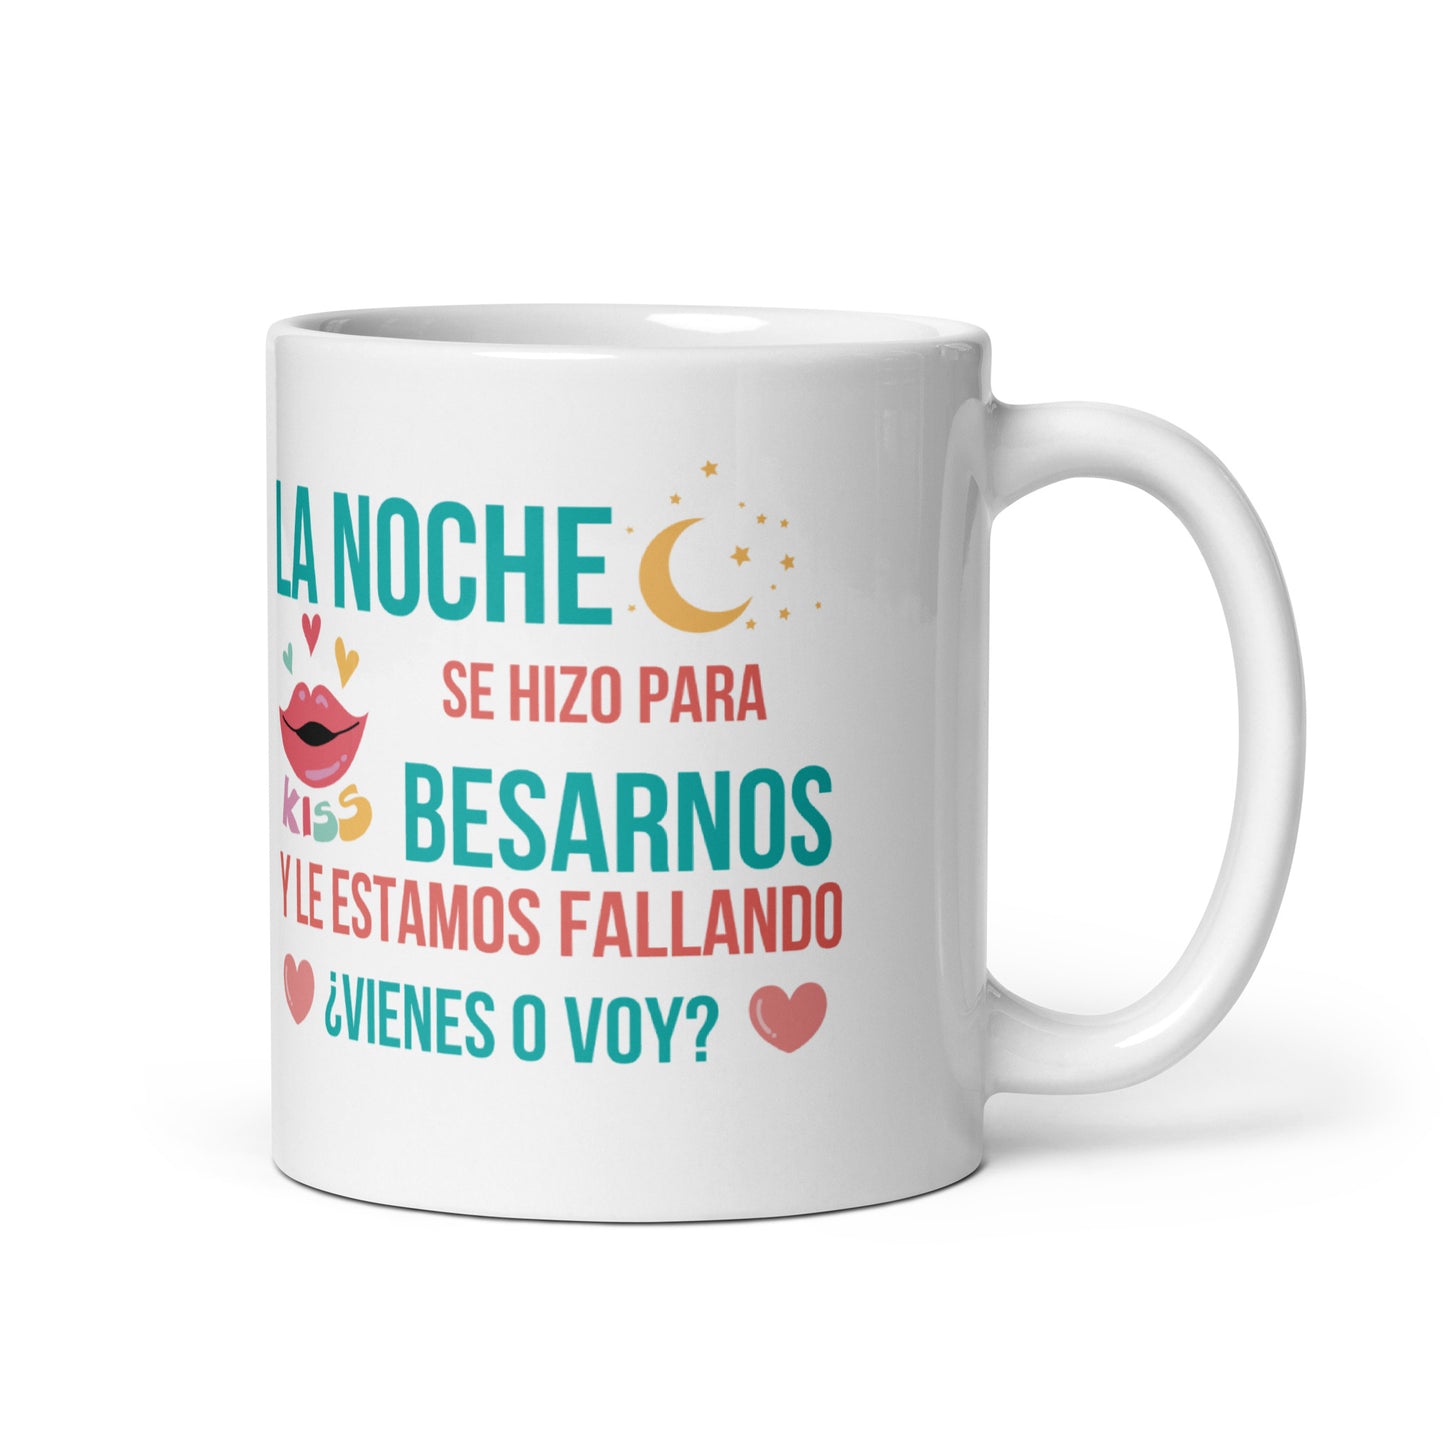 The night was made for kissing and we are failing it Mug 